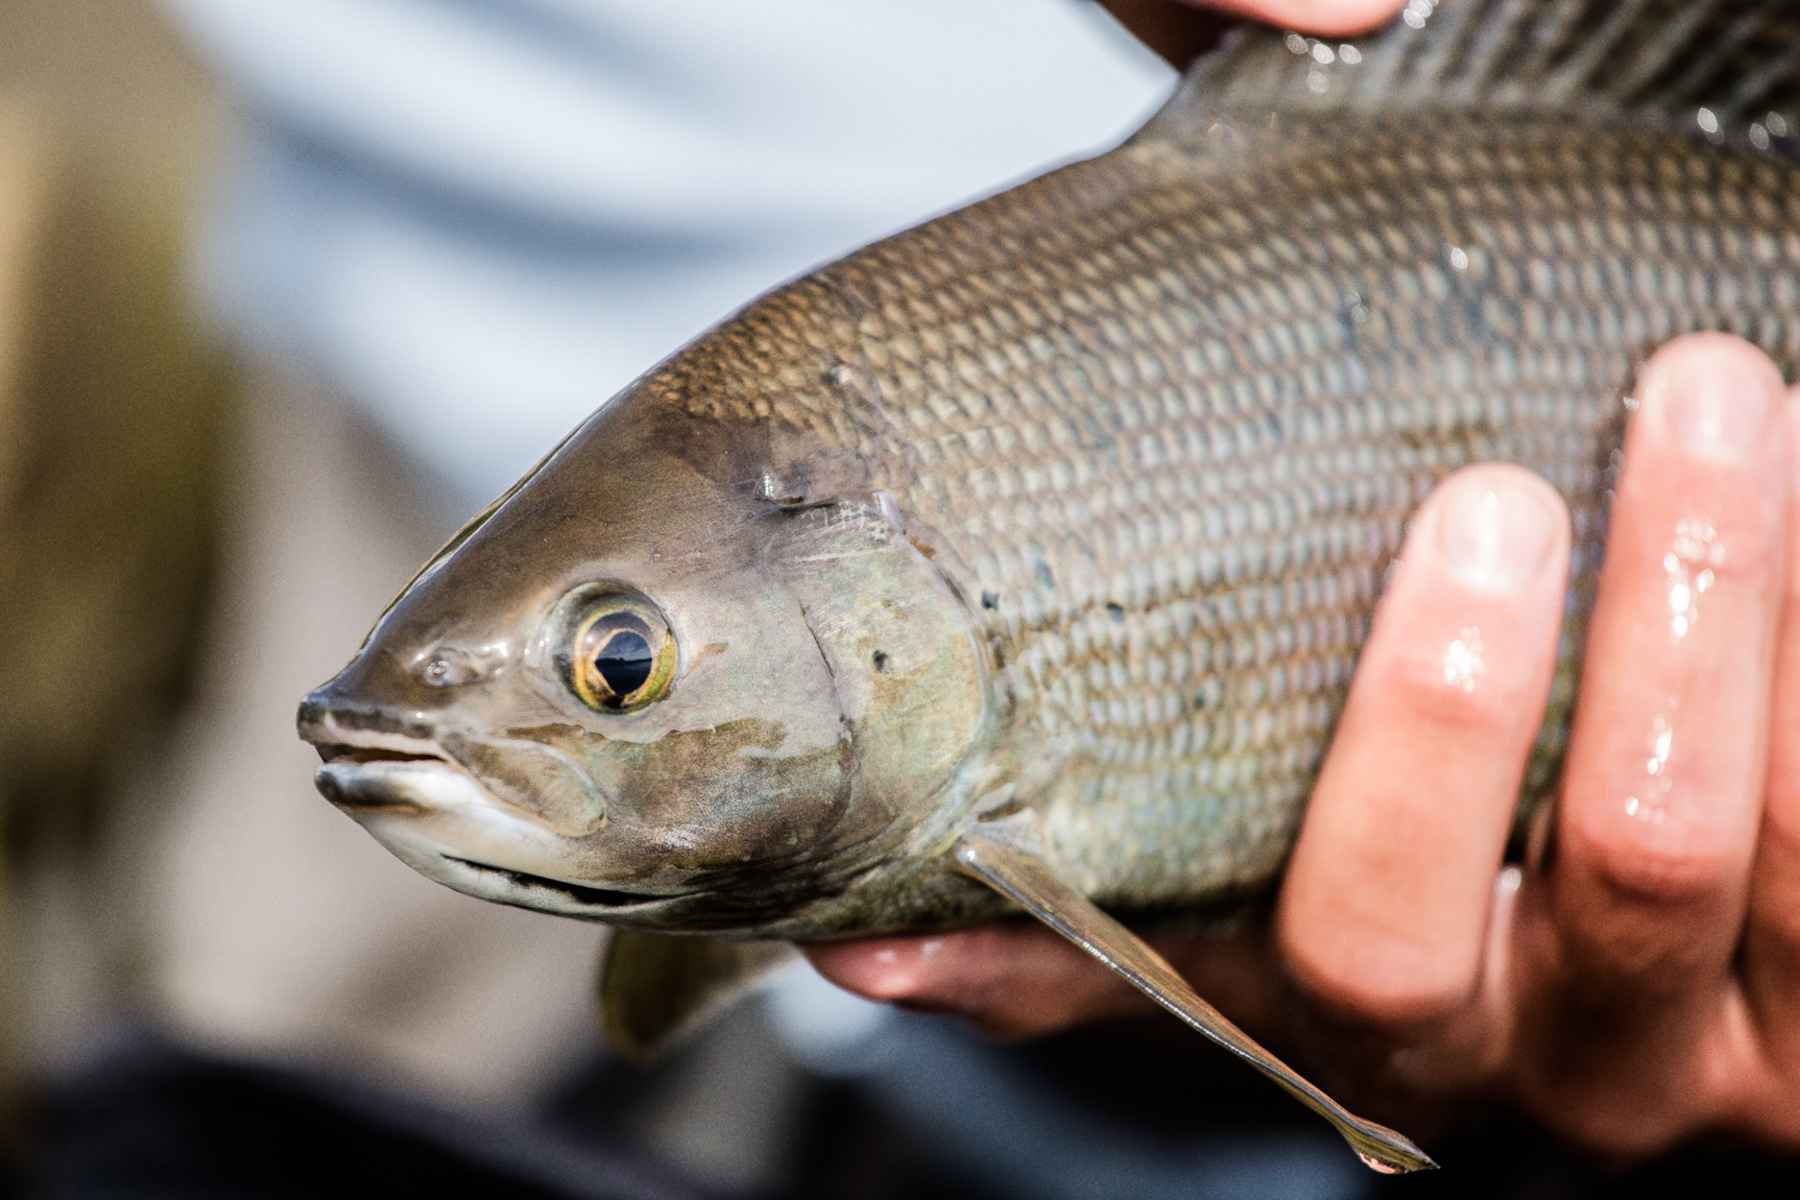 Cooperation from Ranchers is Helping Montana's Last Native Grayling Survive